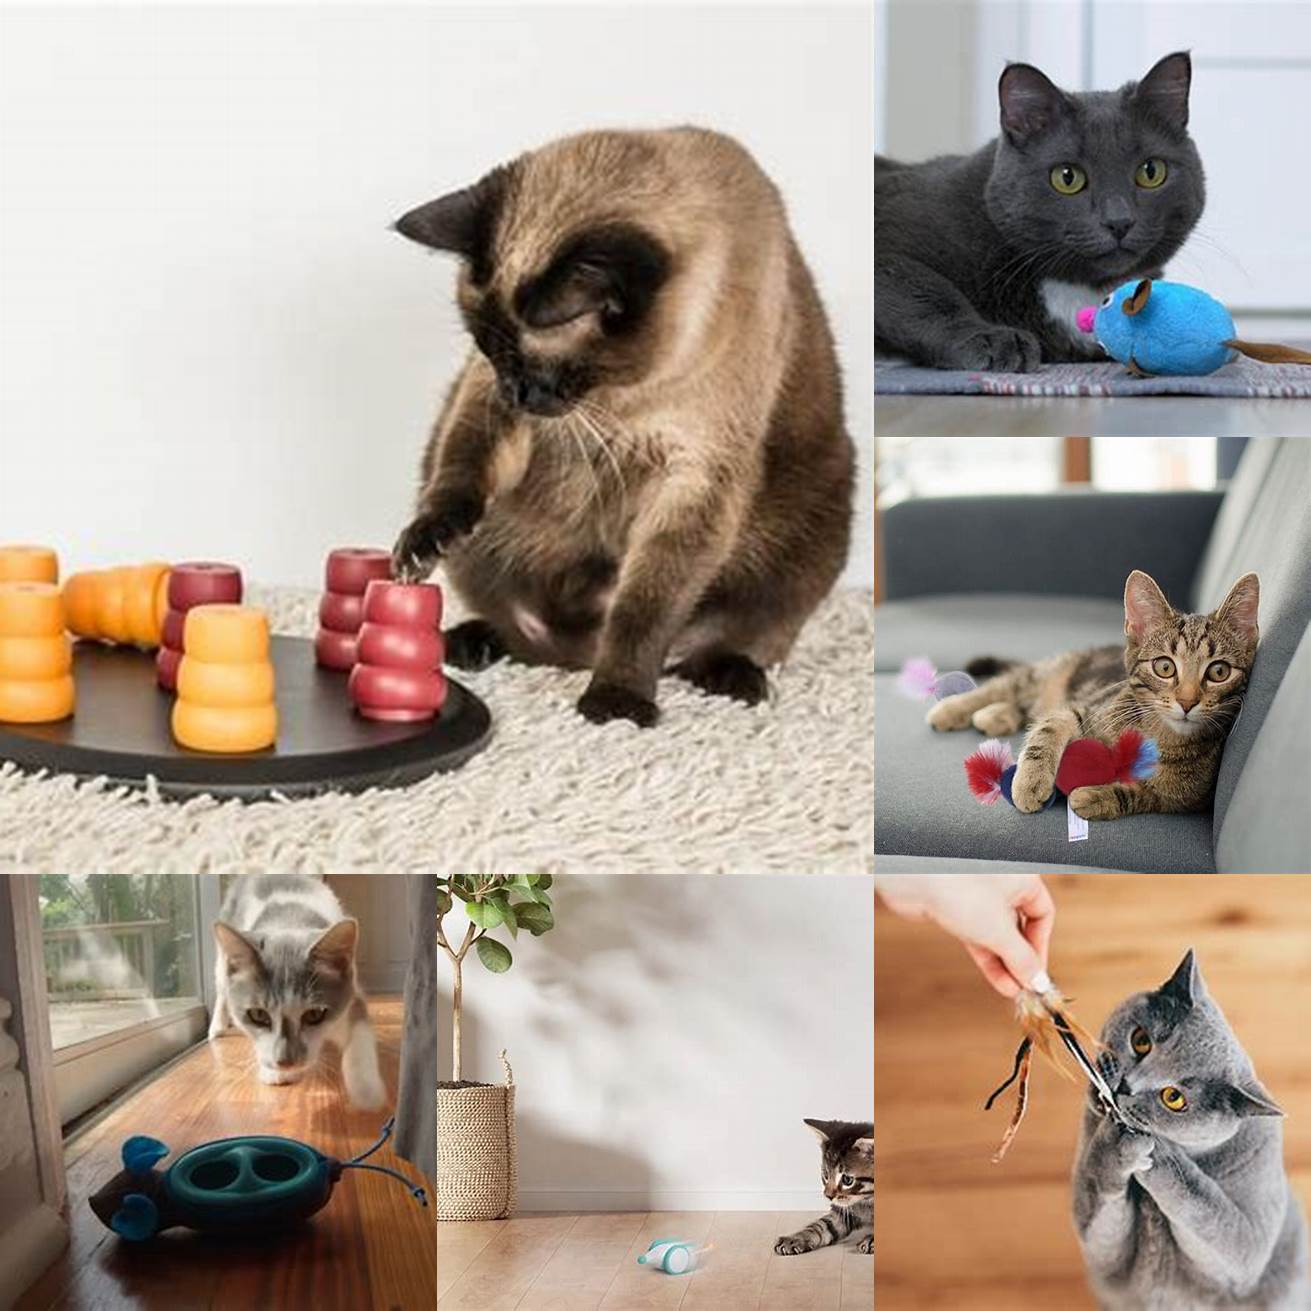 1 Provide your cat with plenty of toys and playtime to satisfy their hunting instincts